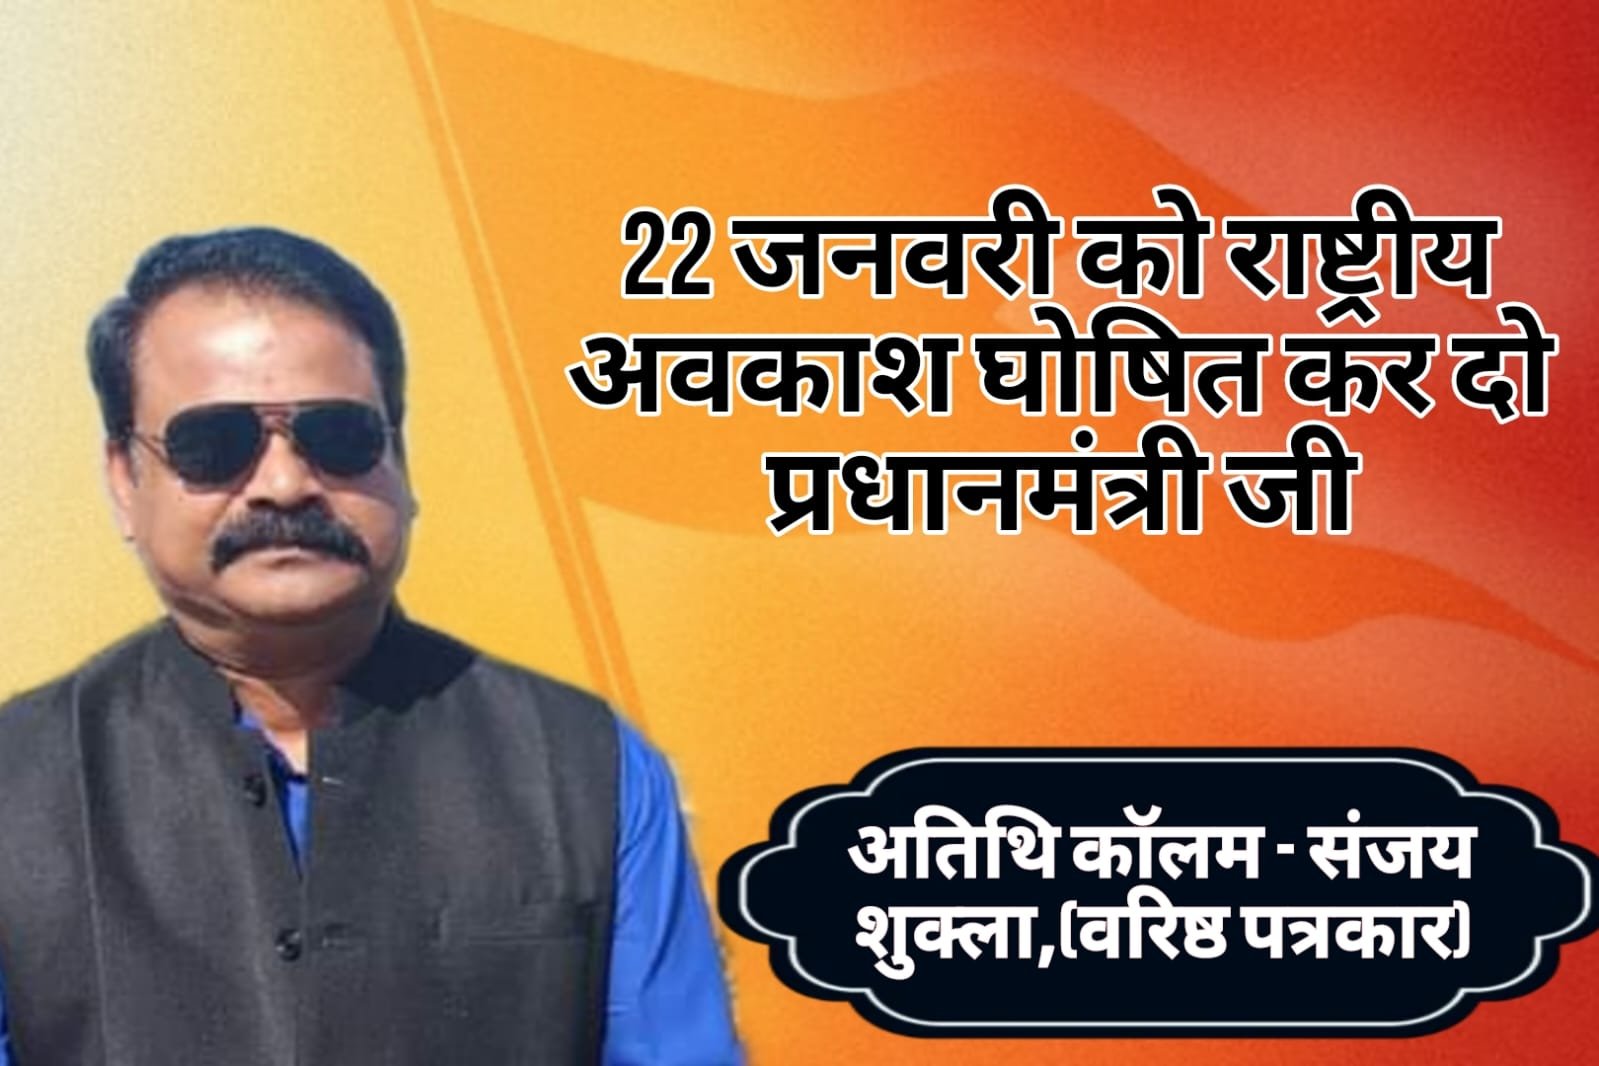 Shri Ram - Prime Minister, declare 22nd January a national holiday.